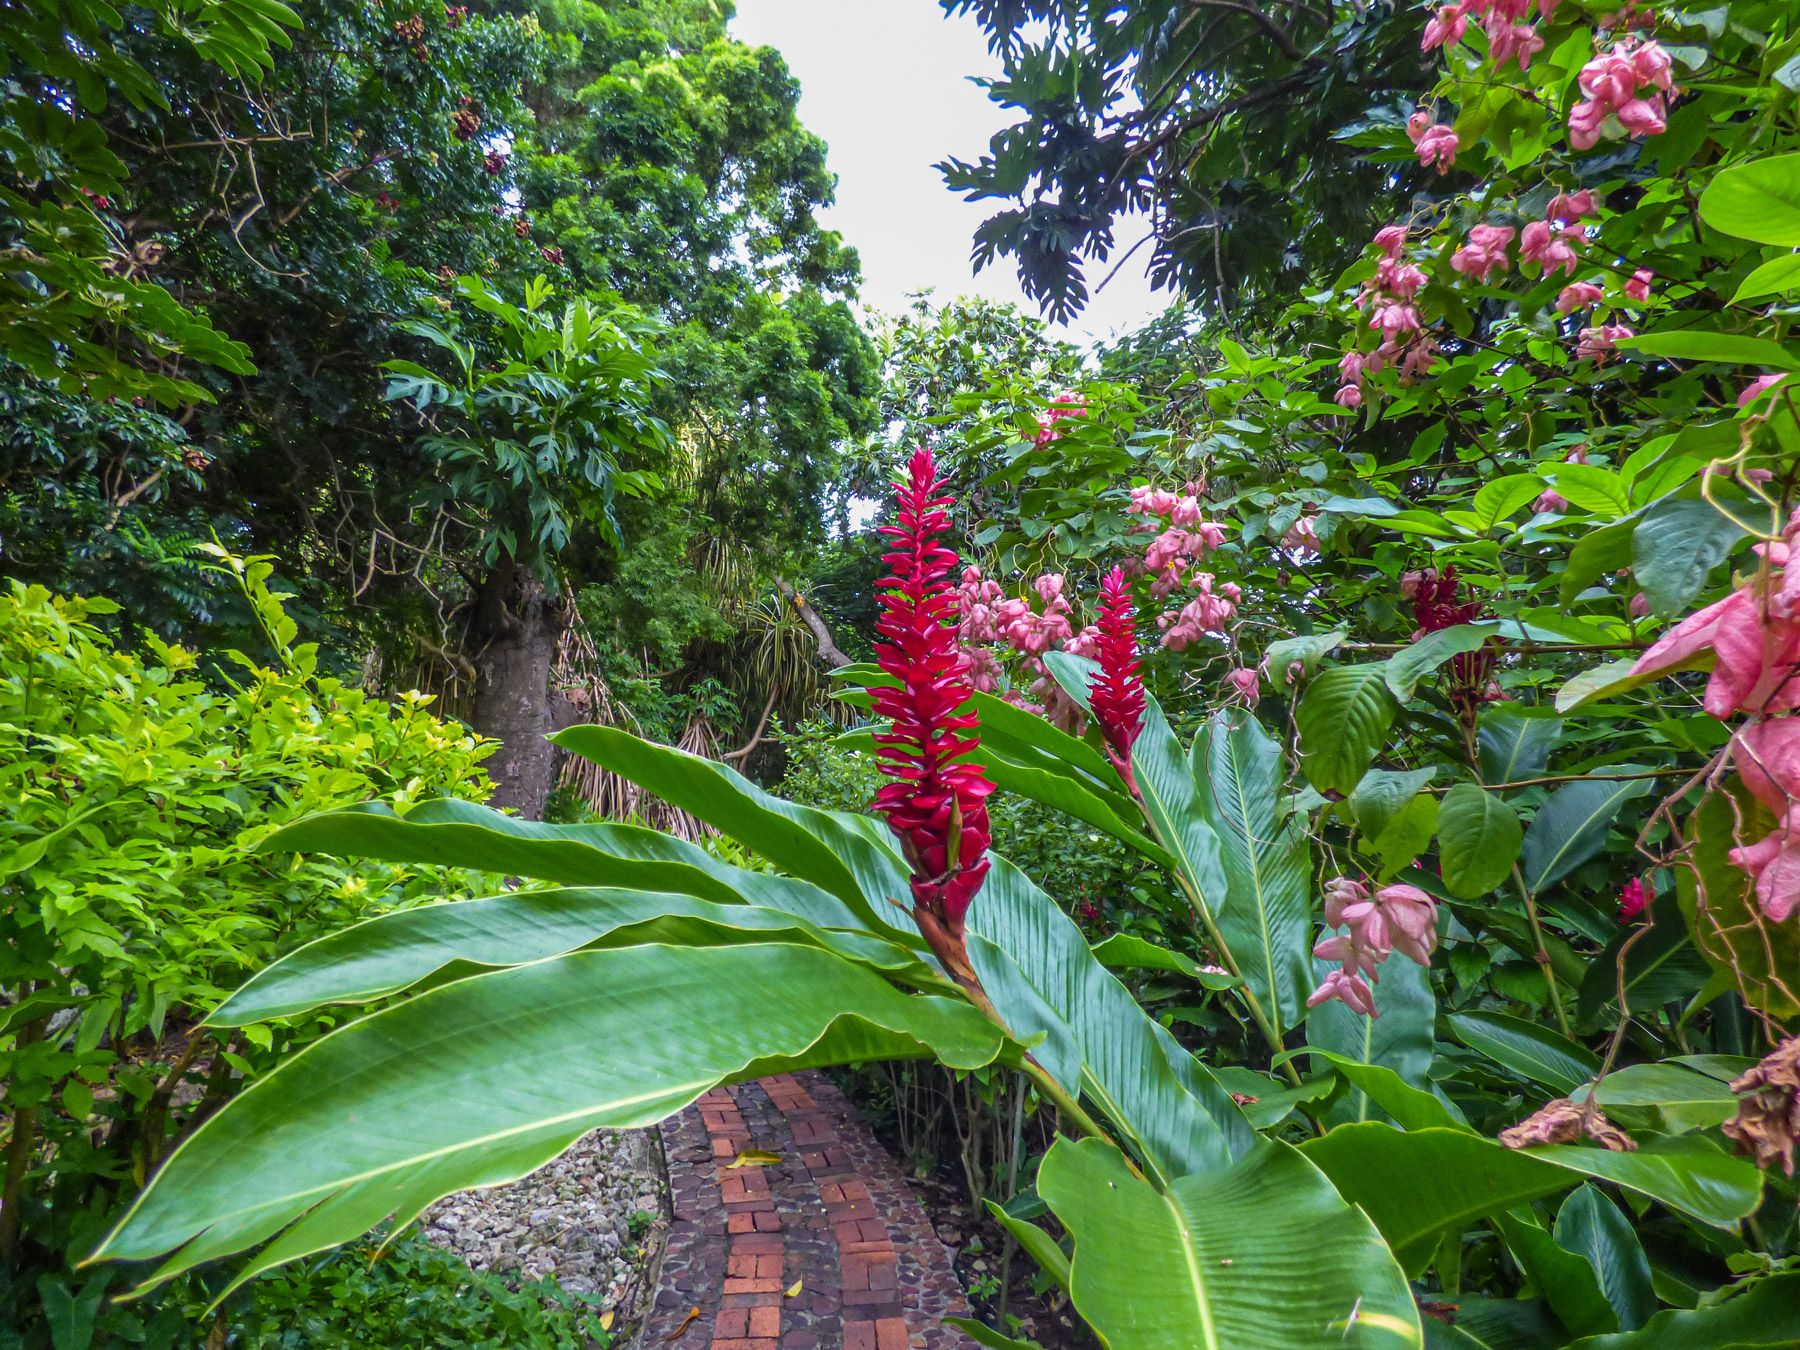 Andromedas Botanic Garden trail sorrounded by tropical flowers and trees